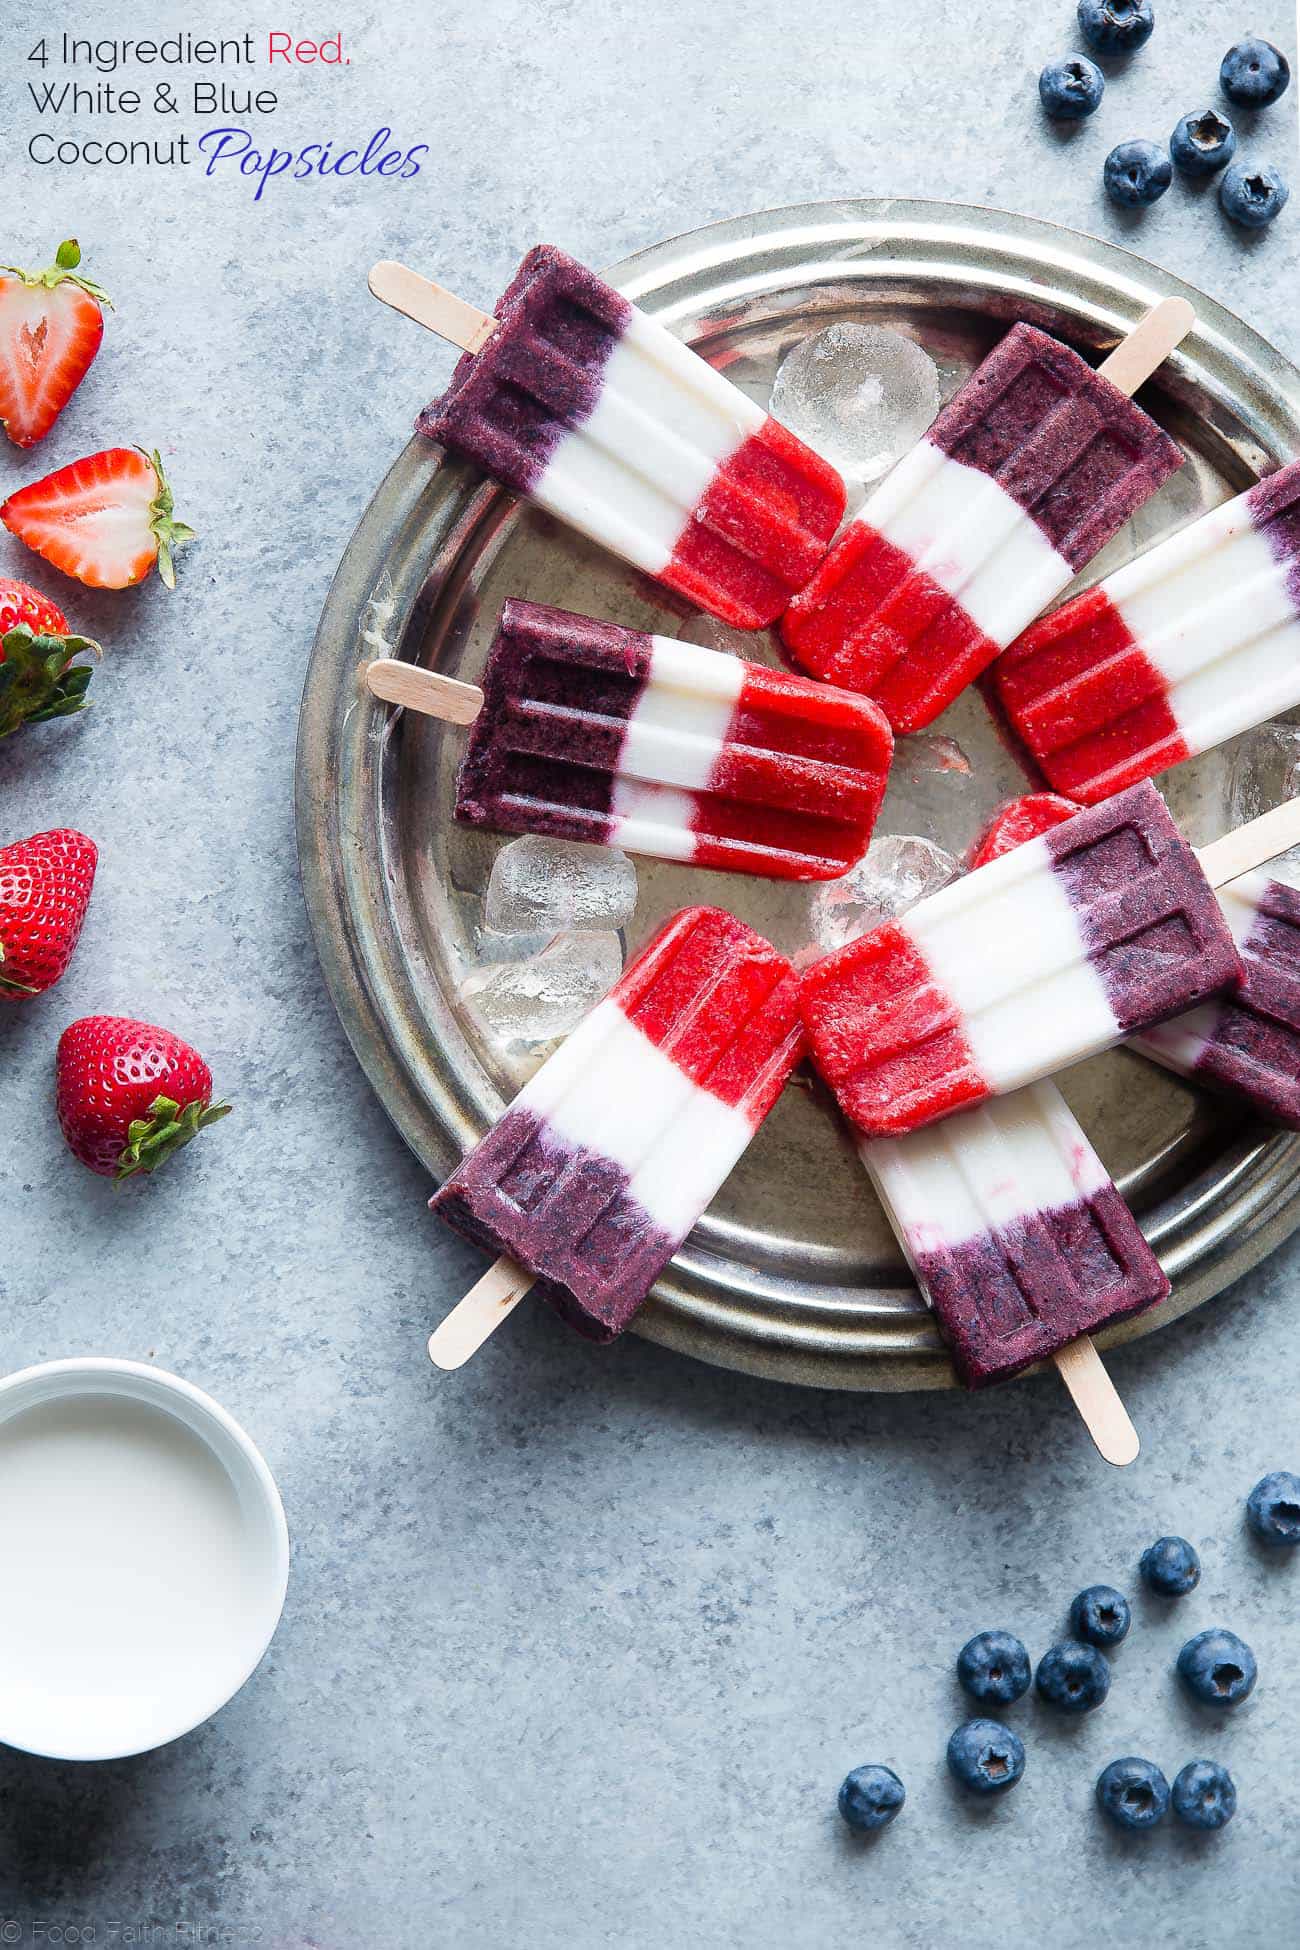 Strawberry Coconut Popsicles with Blueberries